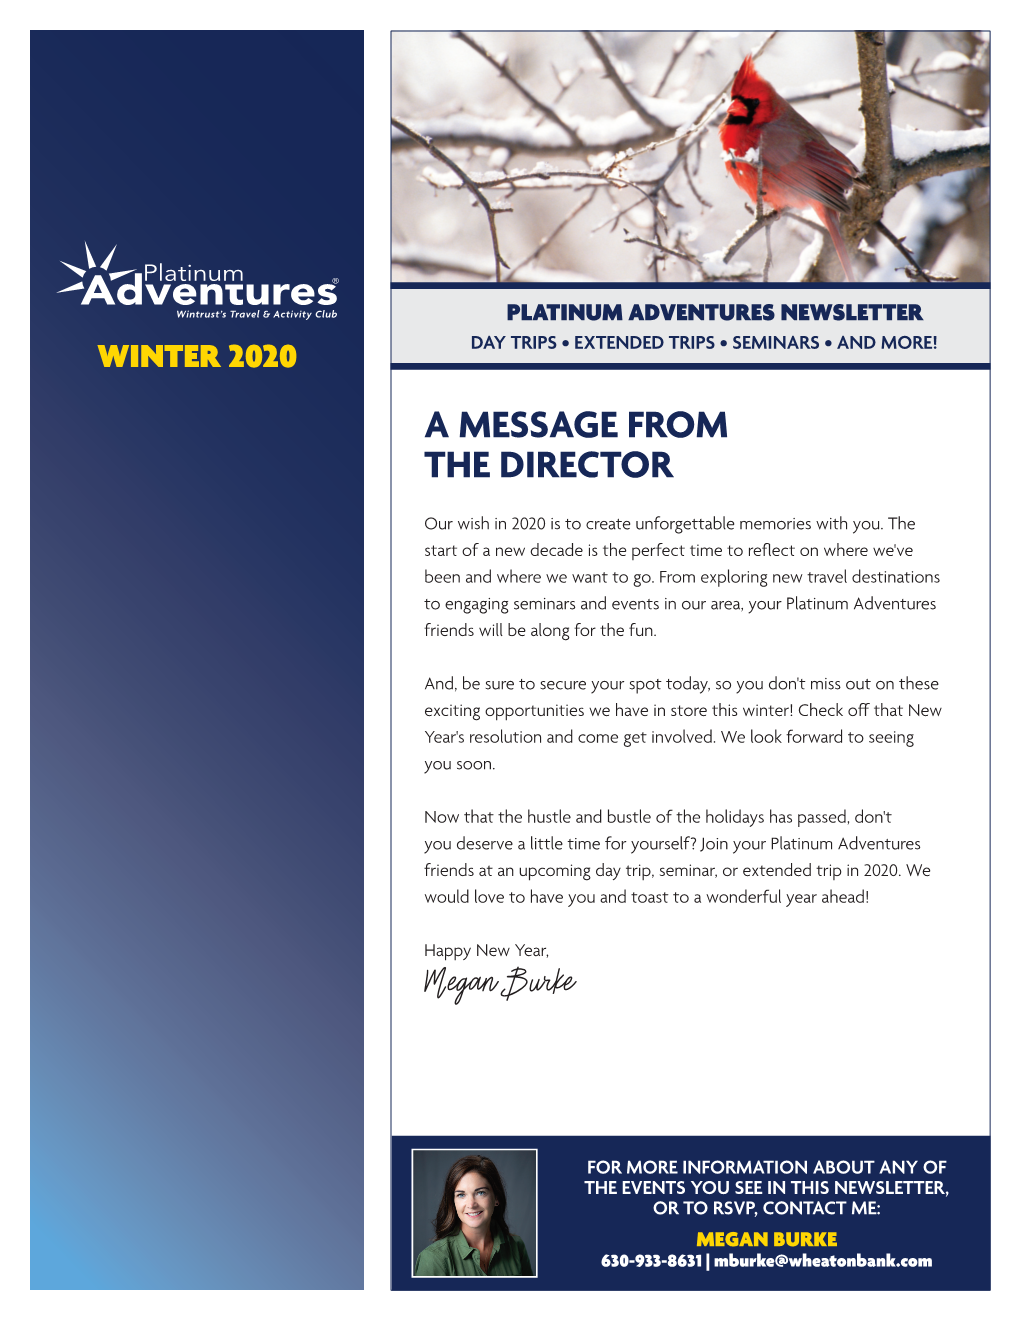 A Message from the Director